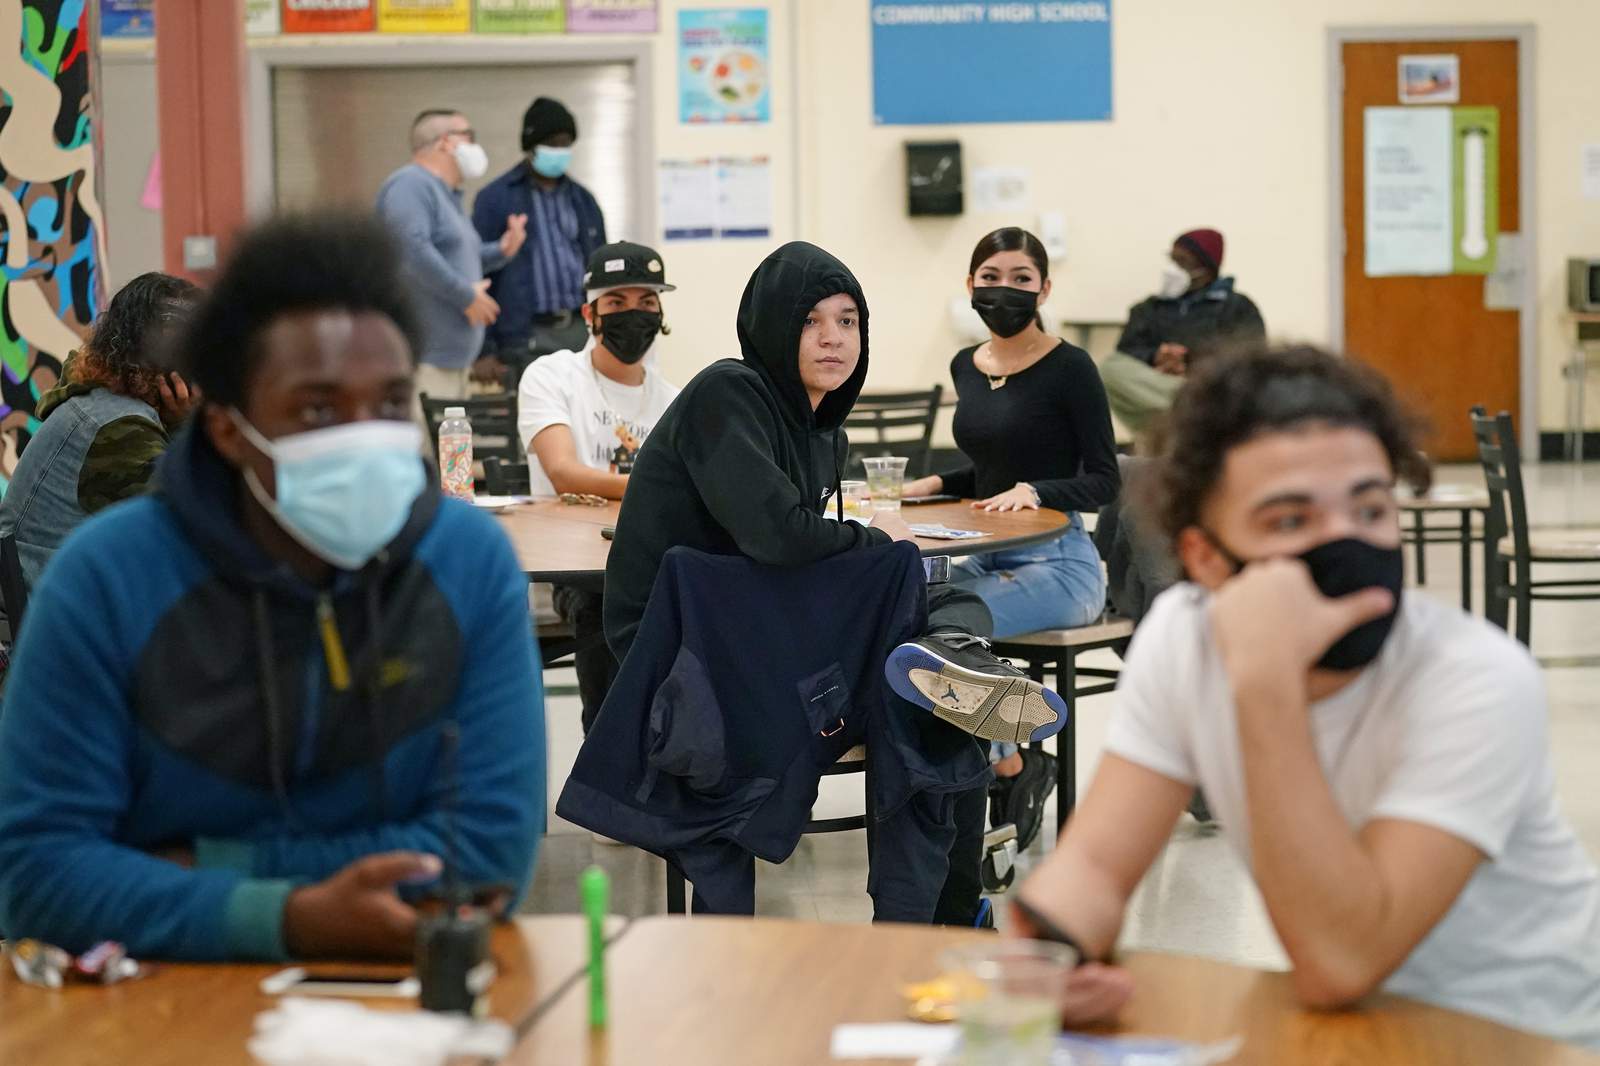 New York City schools to close again as city fights virus